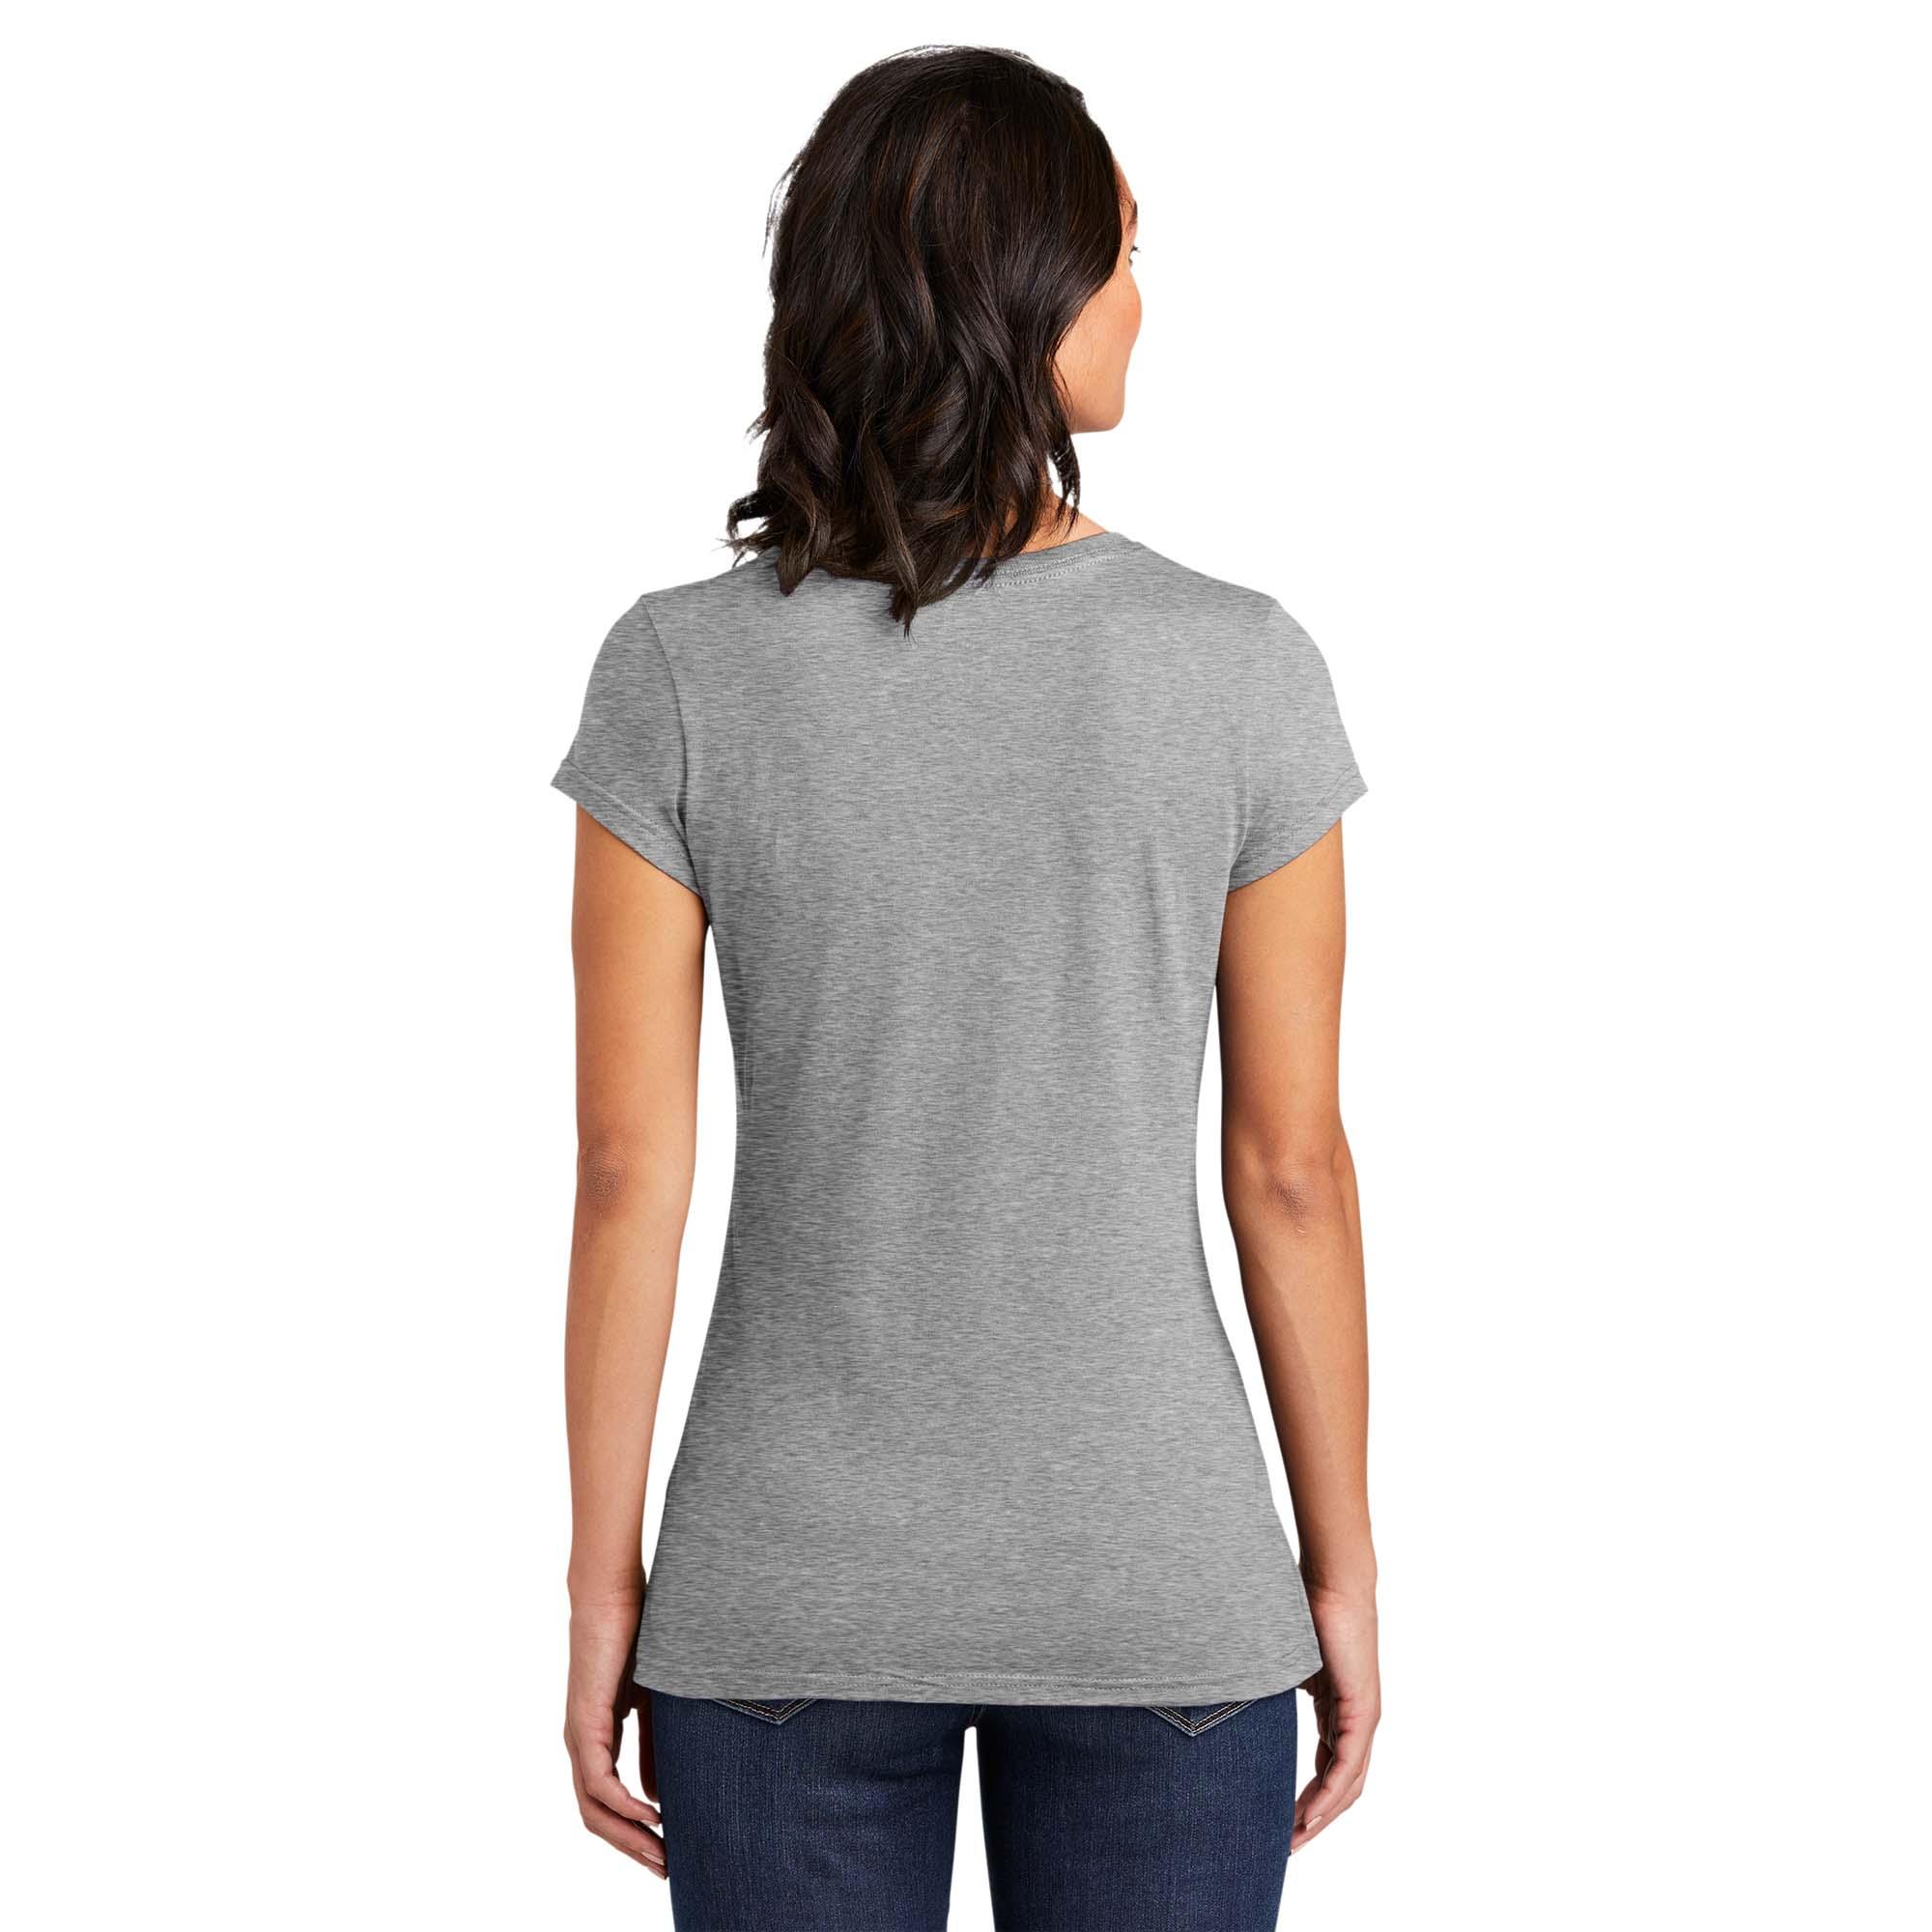 District DT6001 Women's Fitted Very Important Tee - Light Heather Grey ...